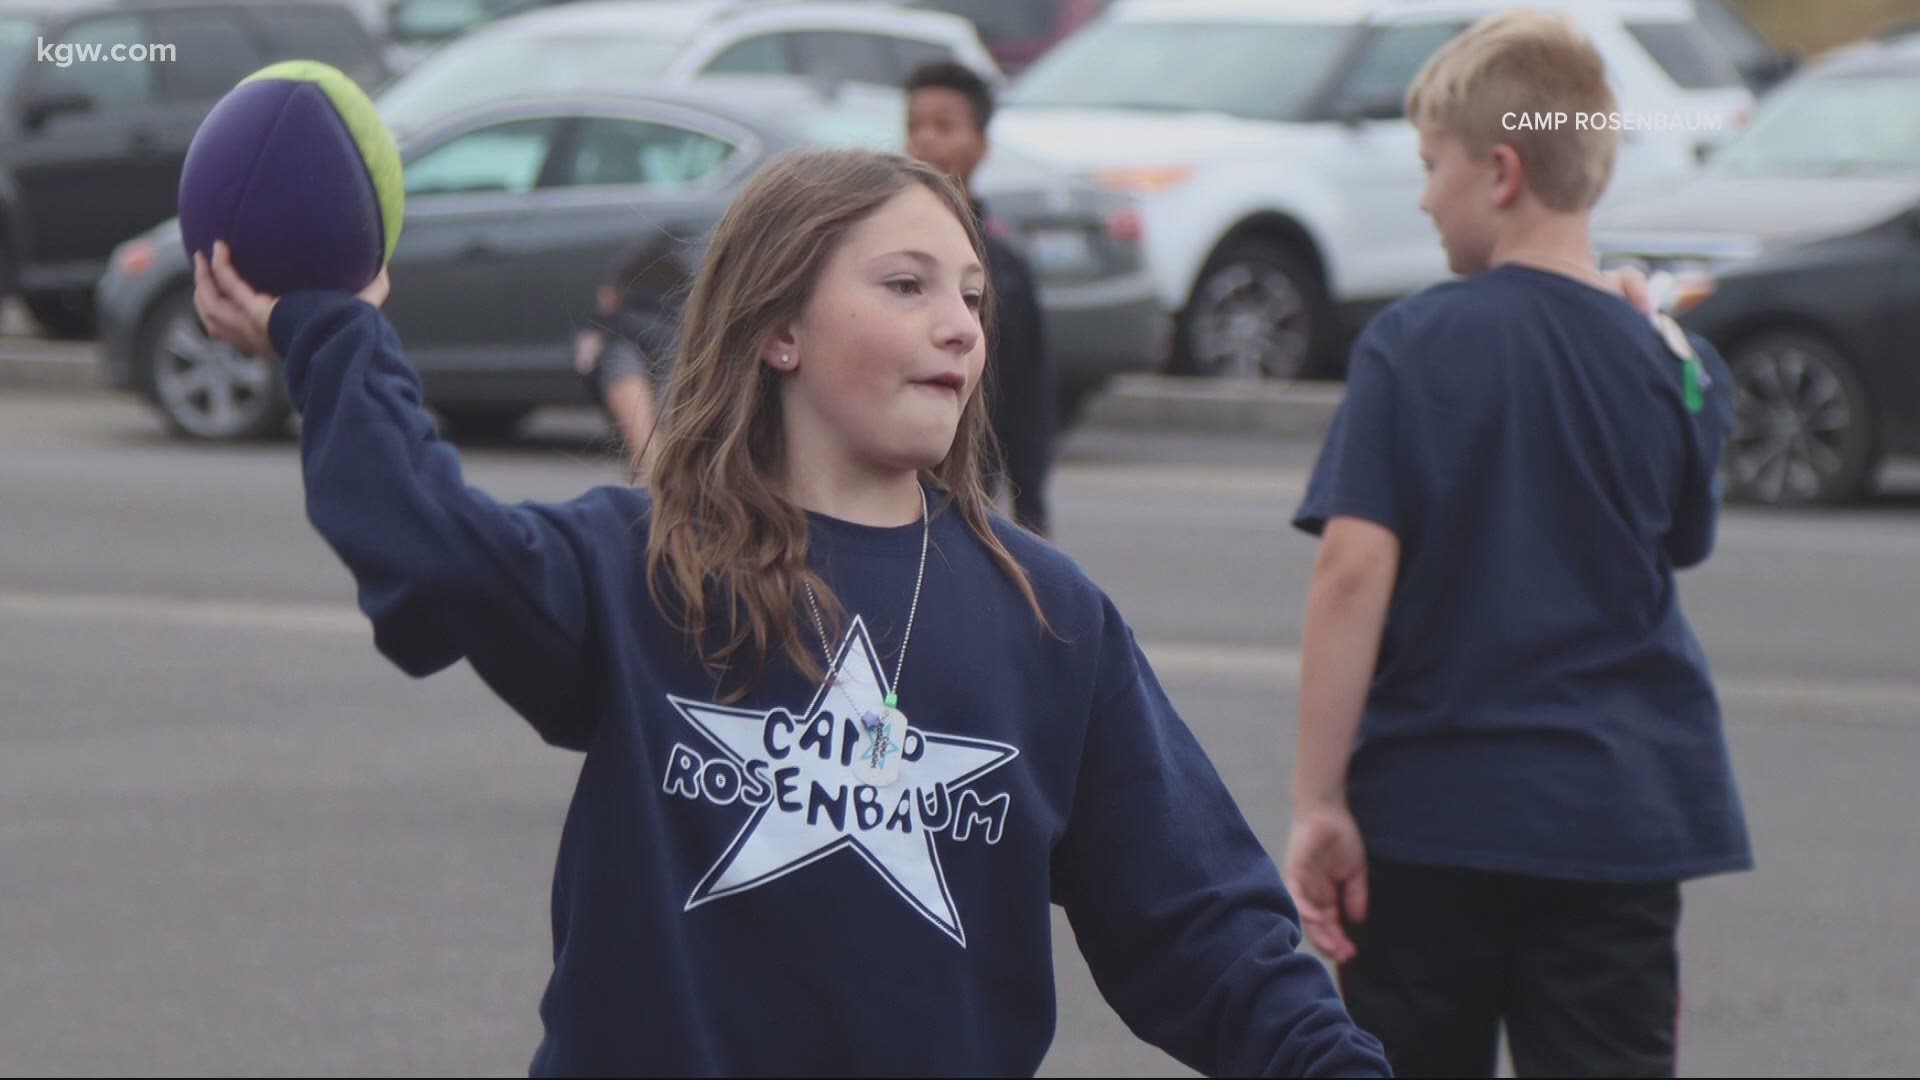 Camp Rosenbaum volunteers make the best out of a irregular summer with "Operation Lemonade," delivering backpacks full of camp basics to help engage kids from afar.